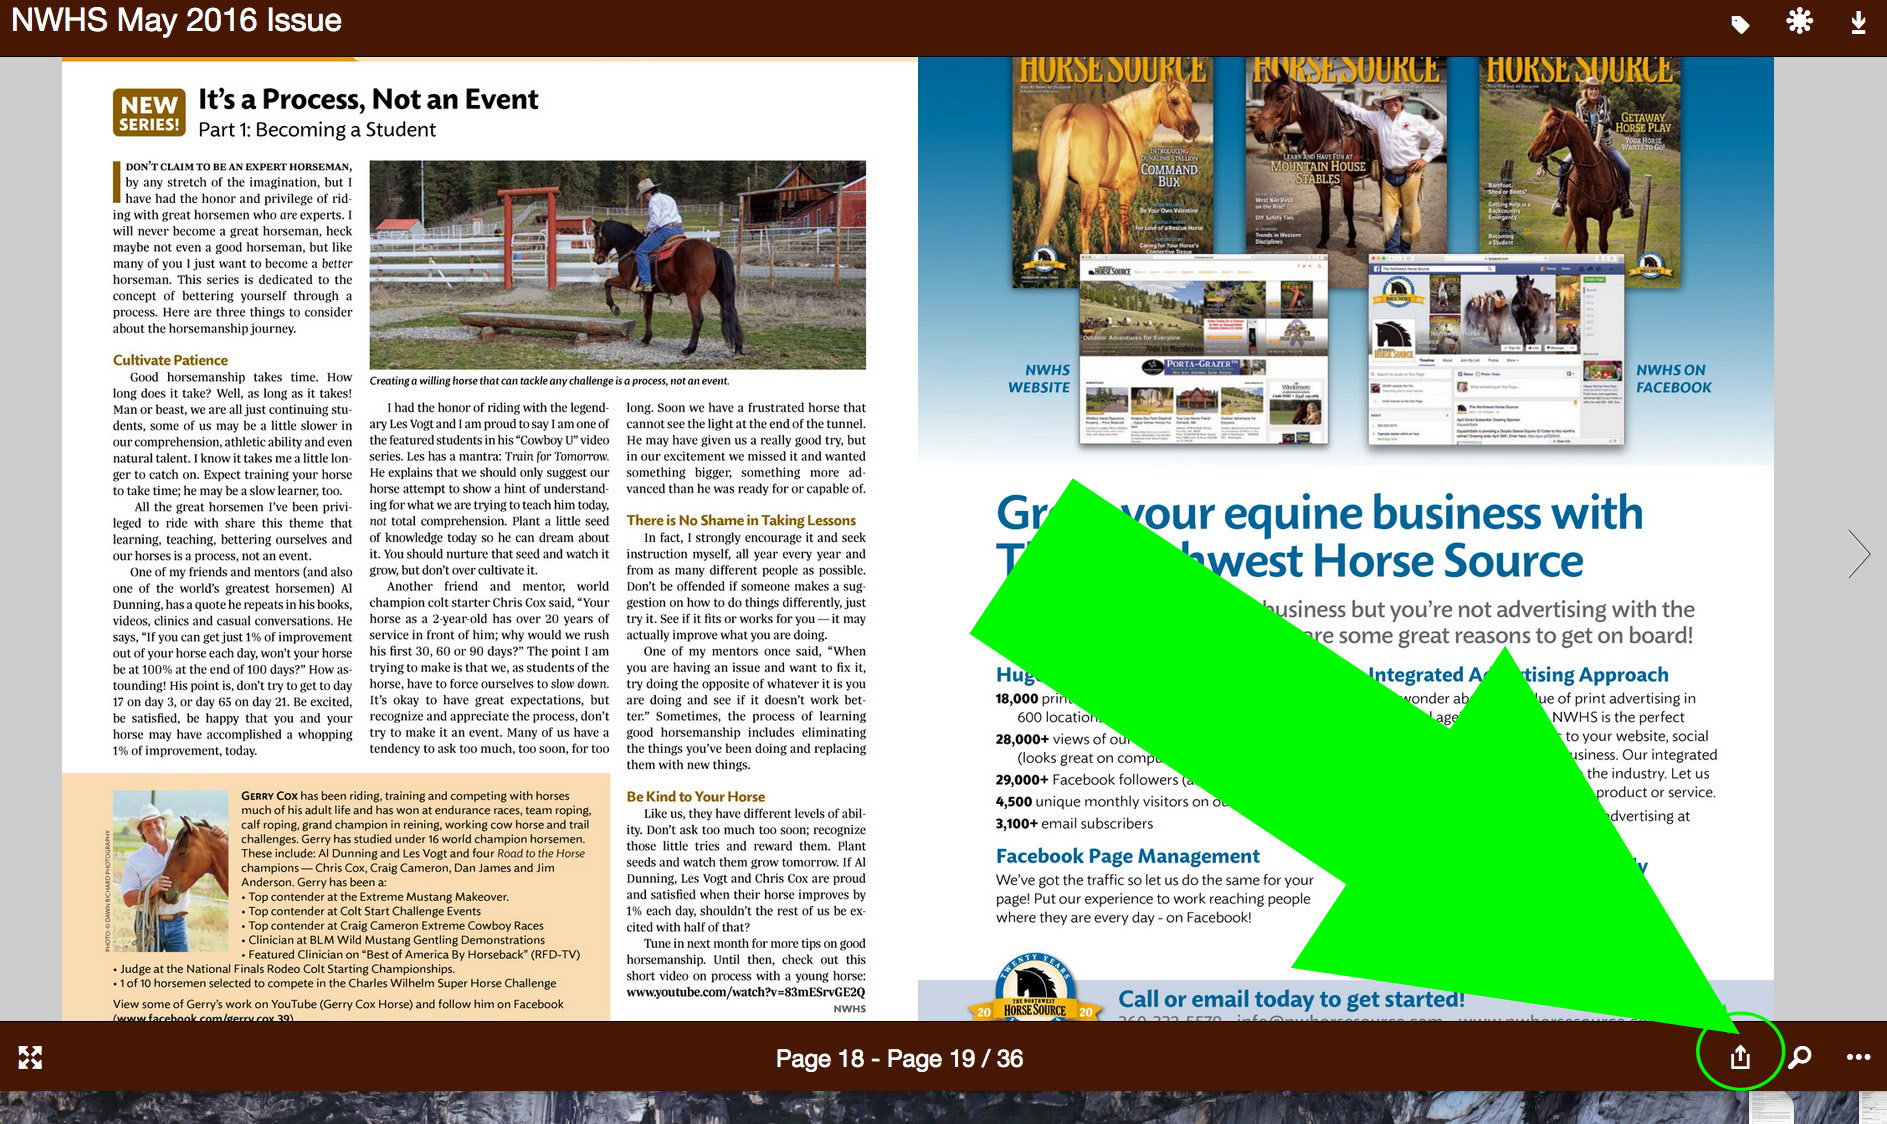 The_Northwest_Horse_Source_NWHS_May_2016_Issue